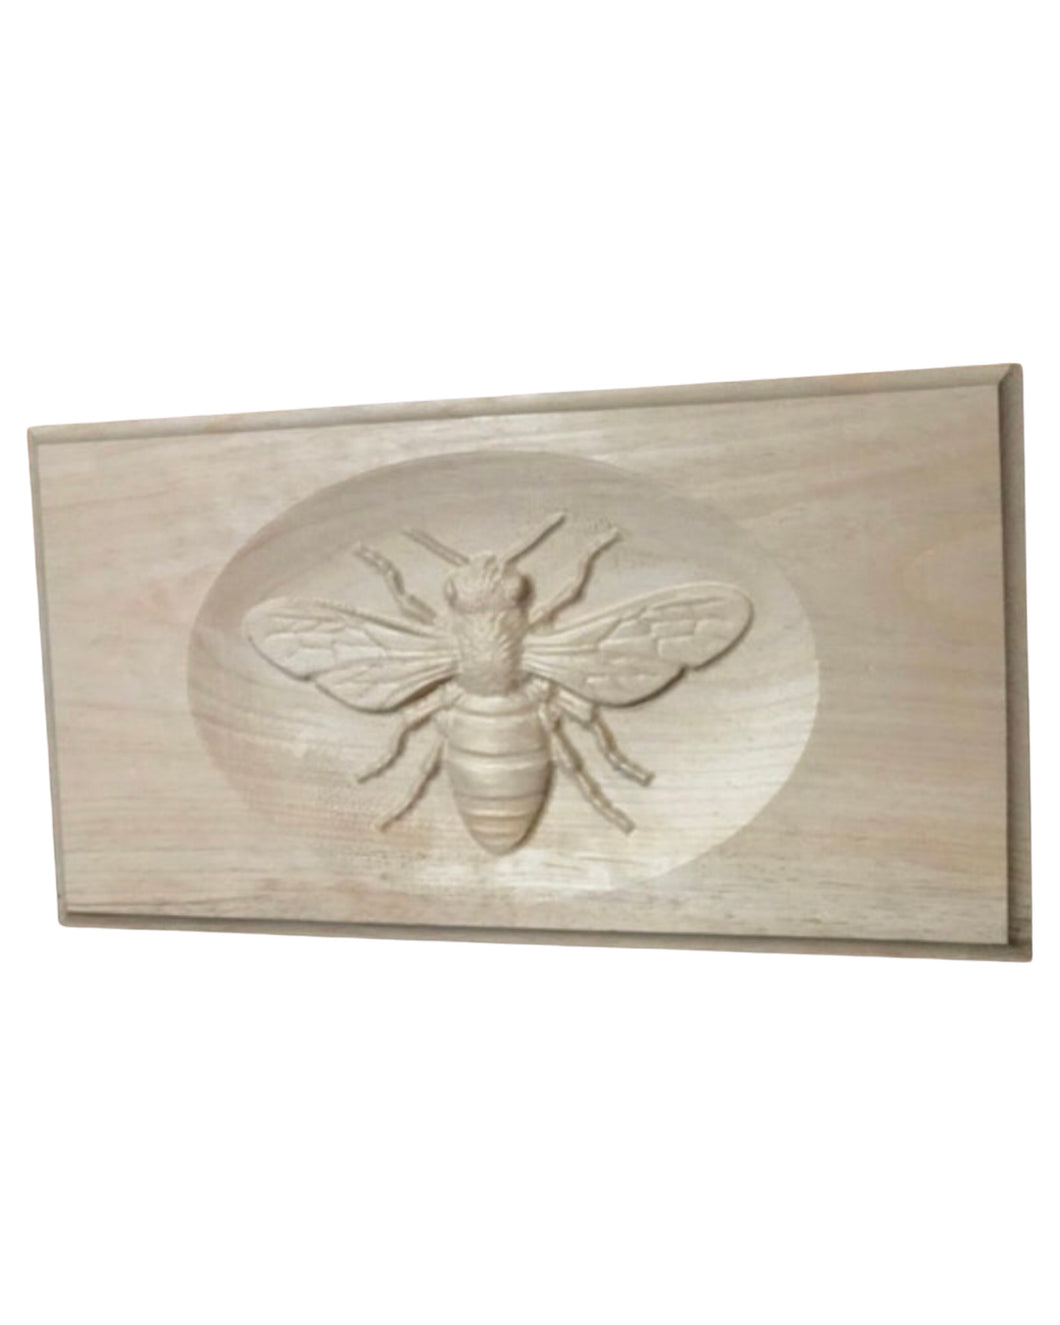 3D Plaque Honey Bee Relief Carving (2 Options Available)